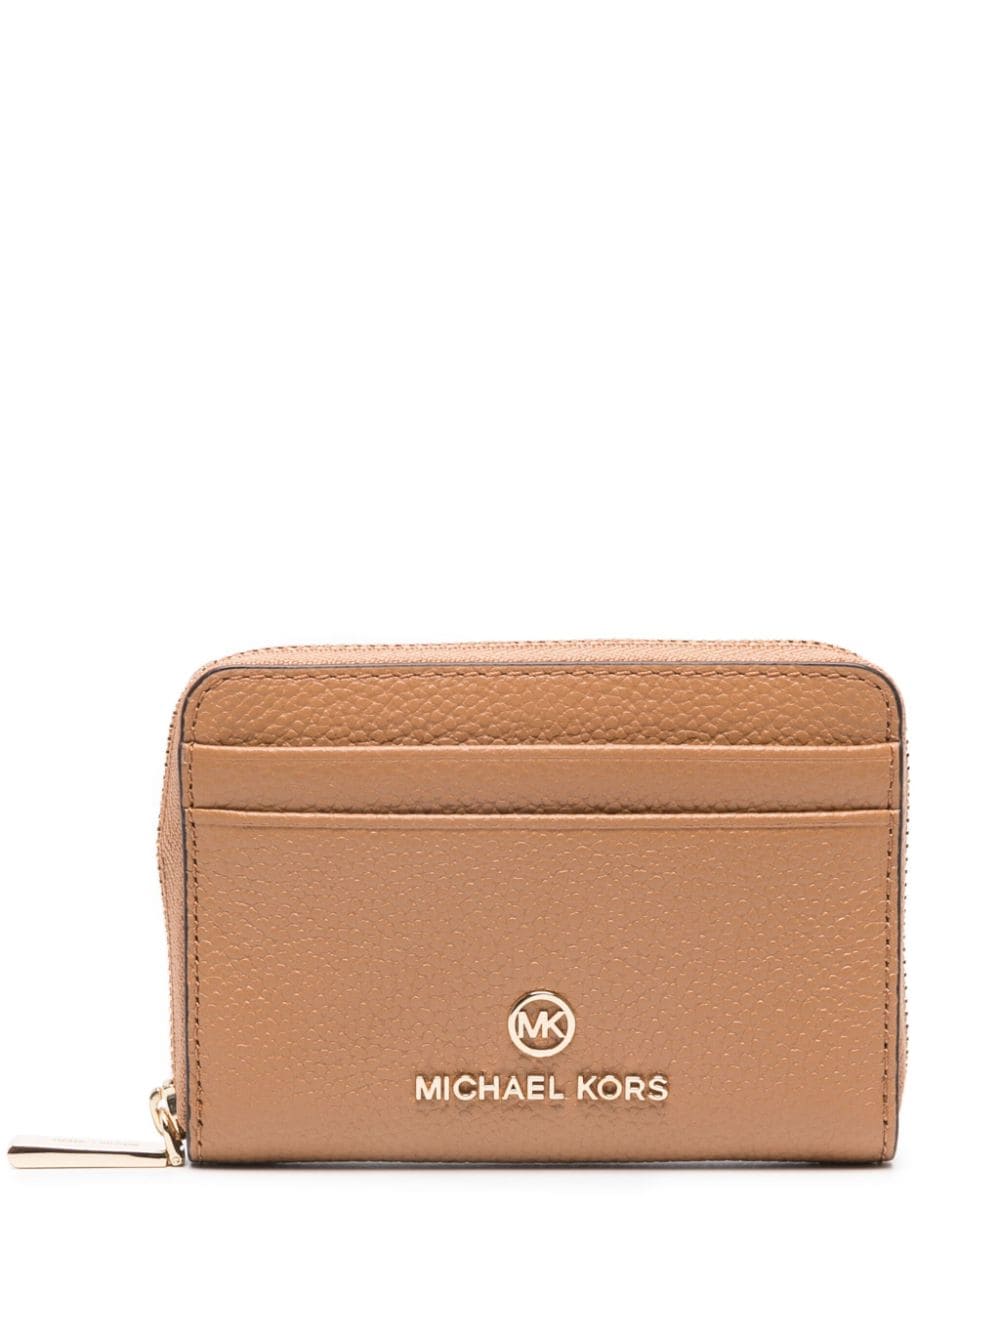 Michael Kors Collection small Jet Set leather wallet - Brown von Michael Kors Collection